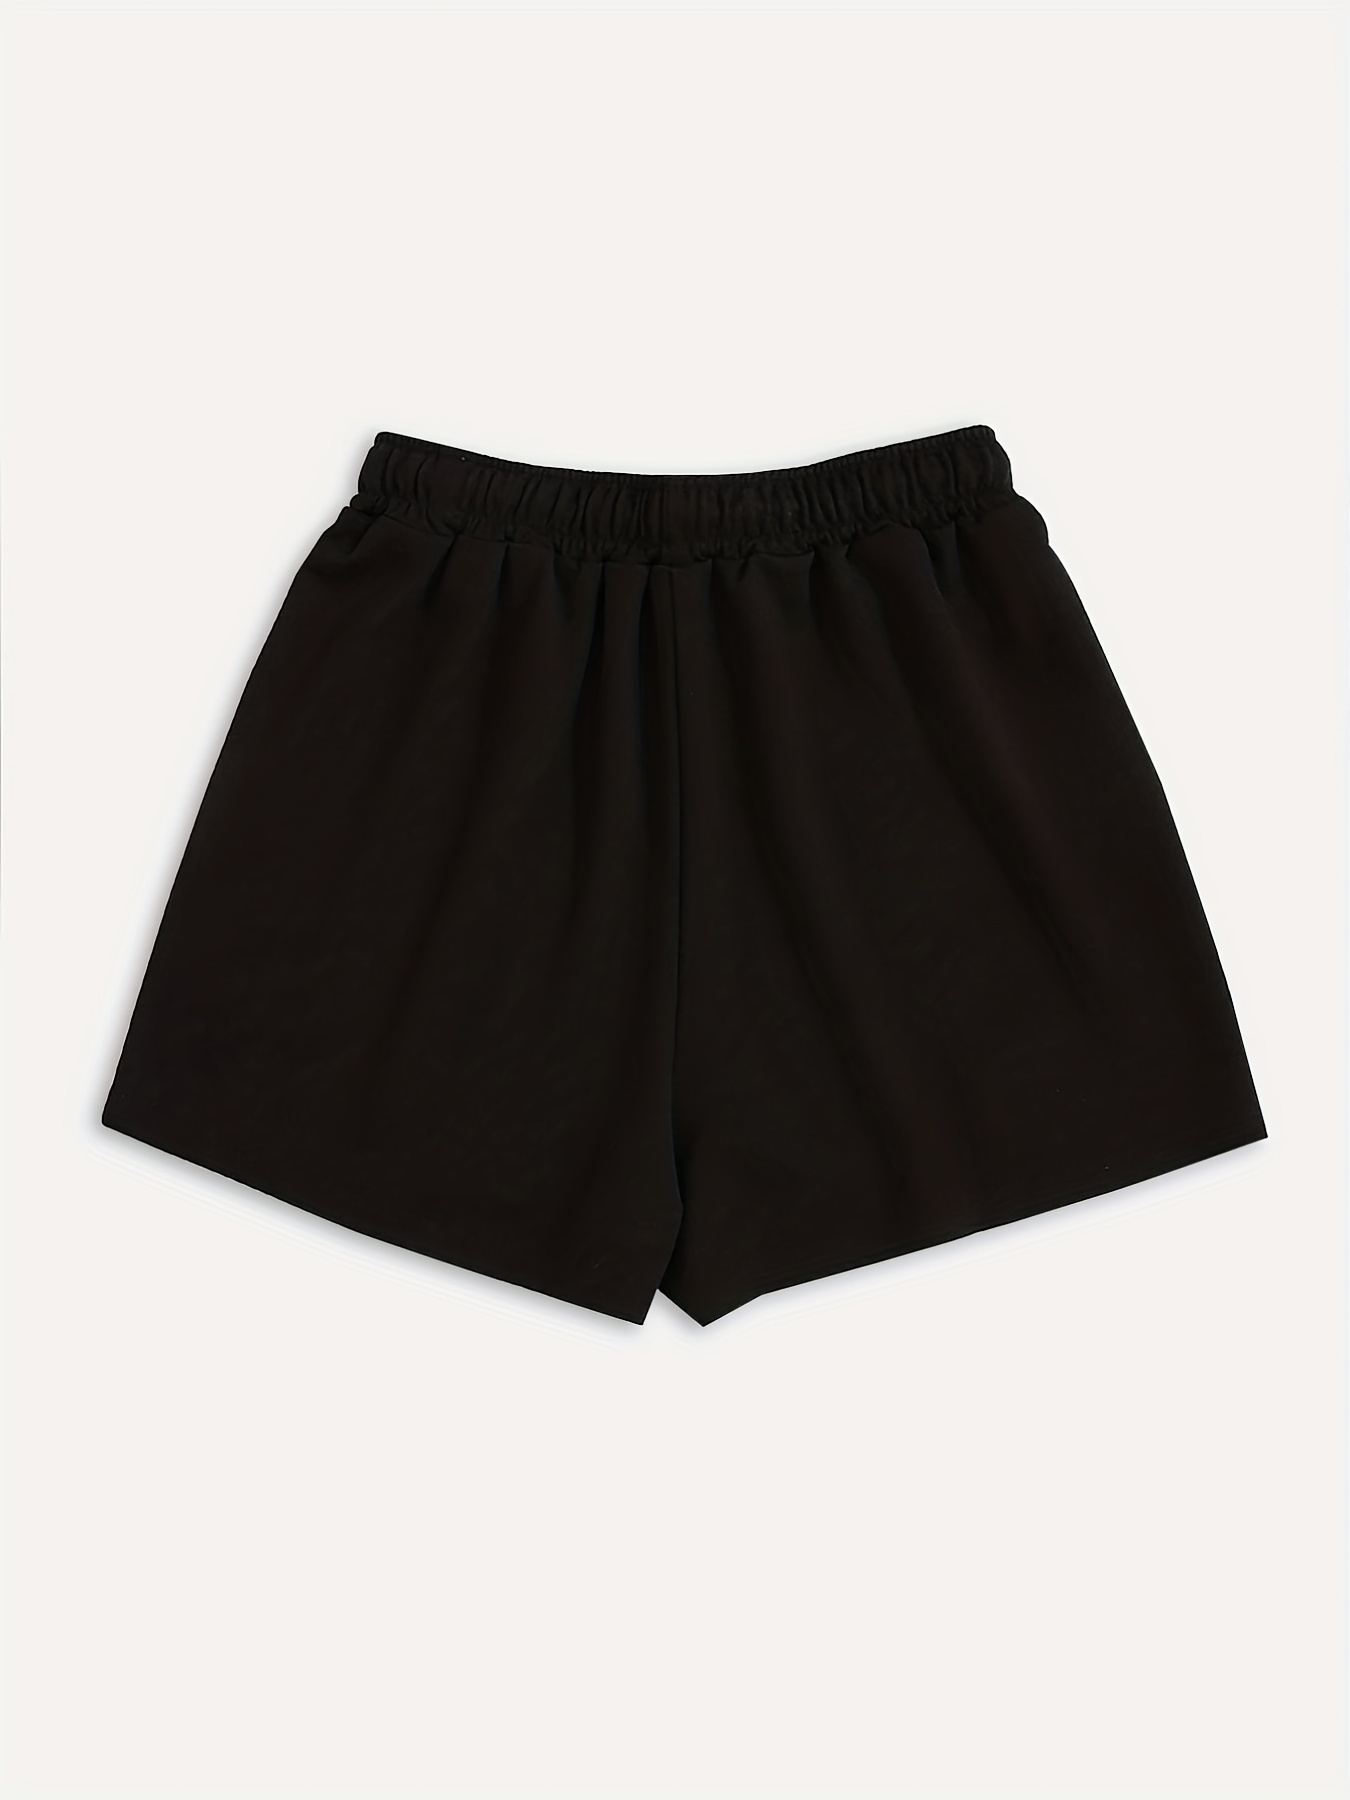 Women's Shorts – Stretch Is Comfort